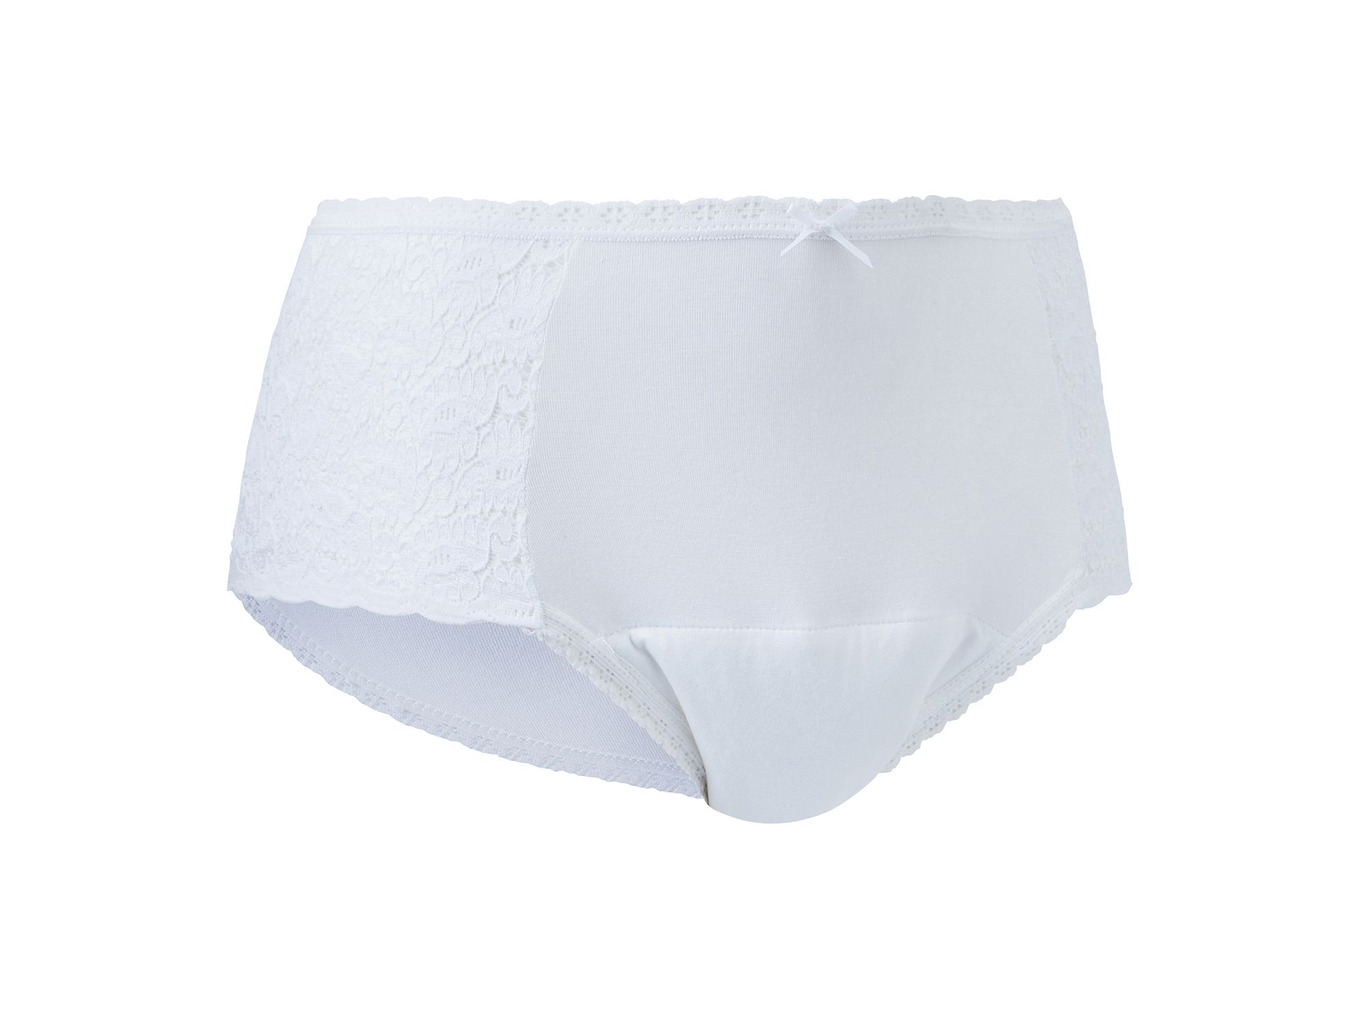 Drylife Male Washable Incontinence Pants